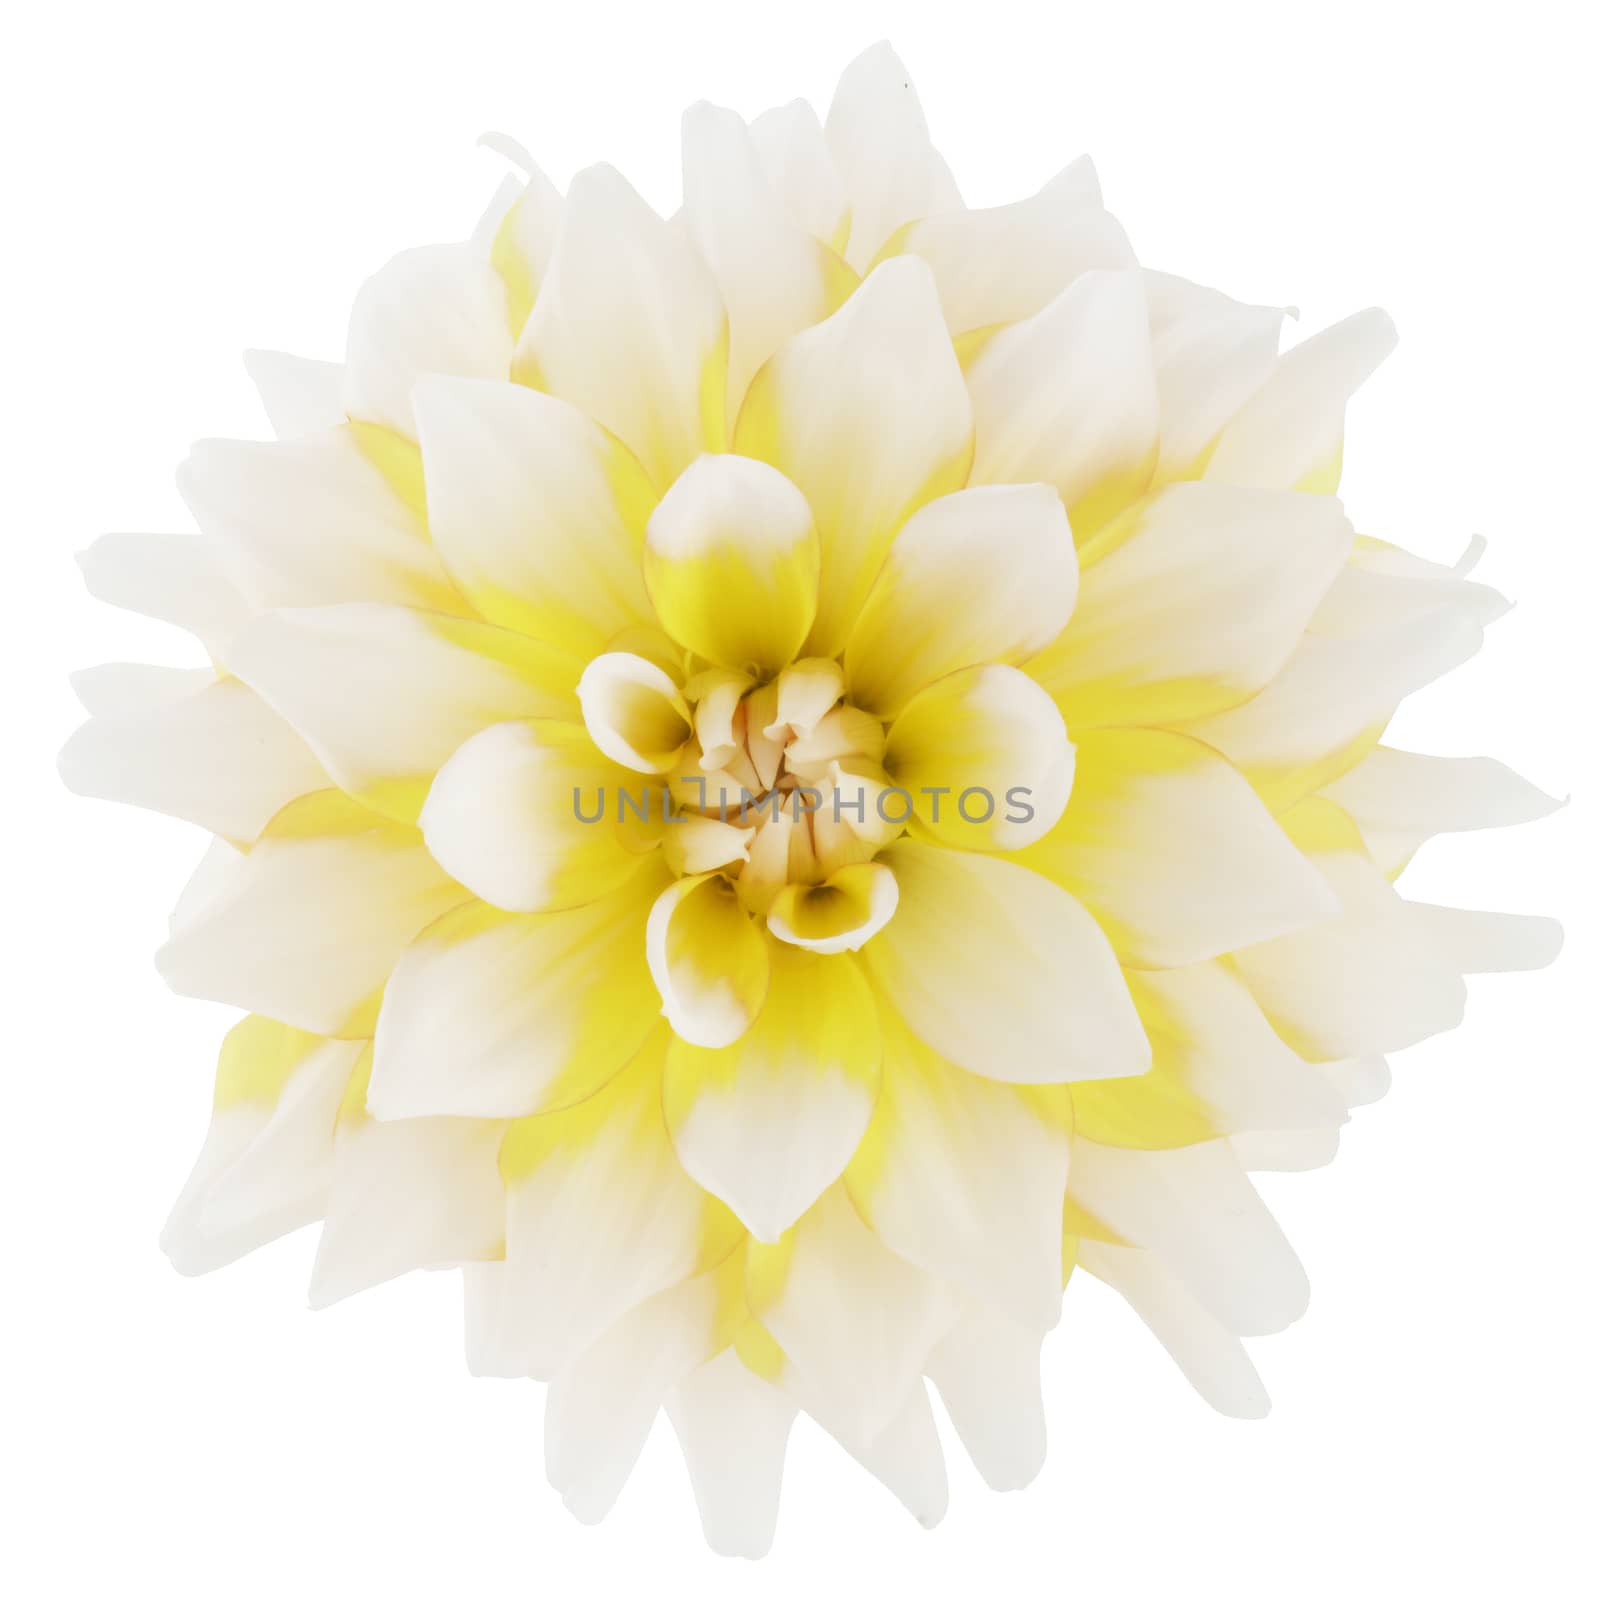 white and yellow bi-color dahlia flower bloom isolated on white by VivacityImages